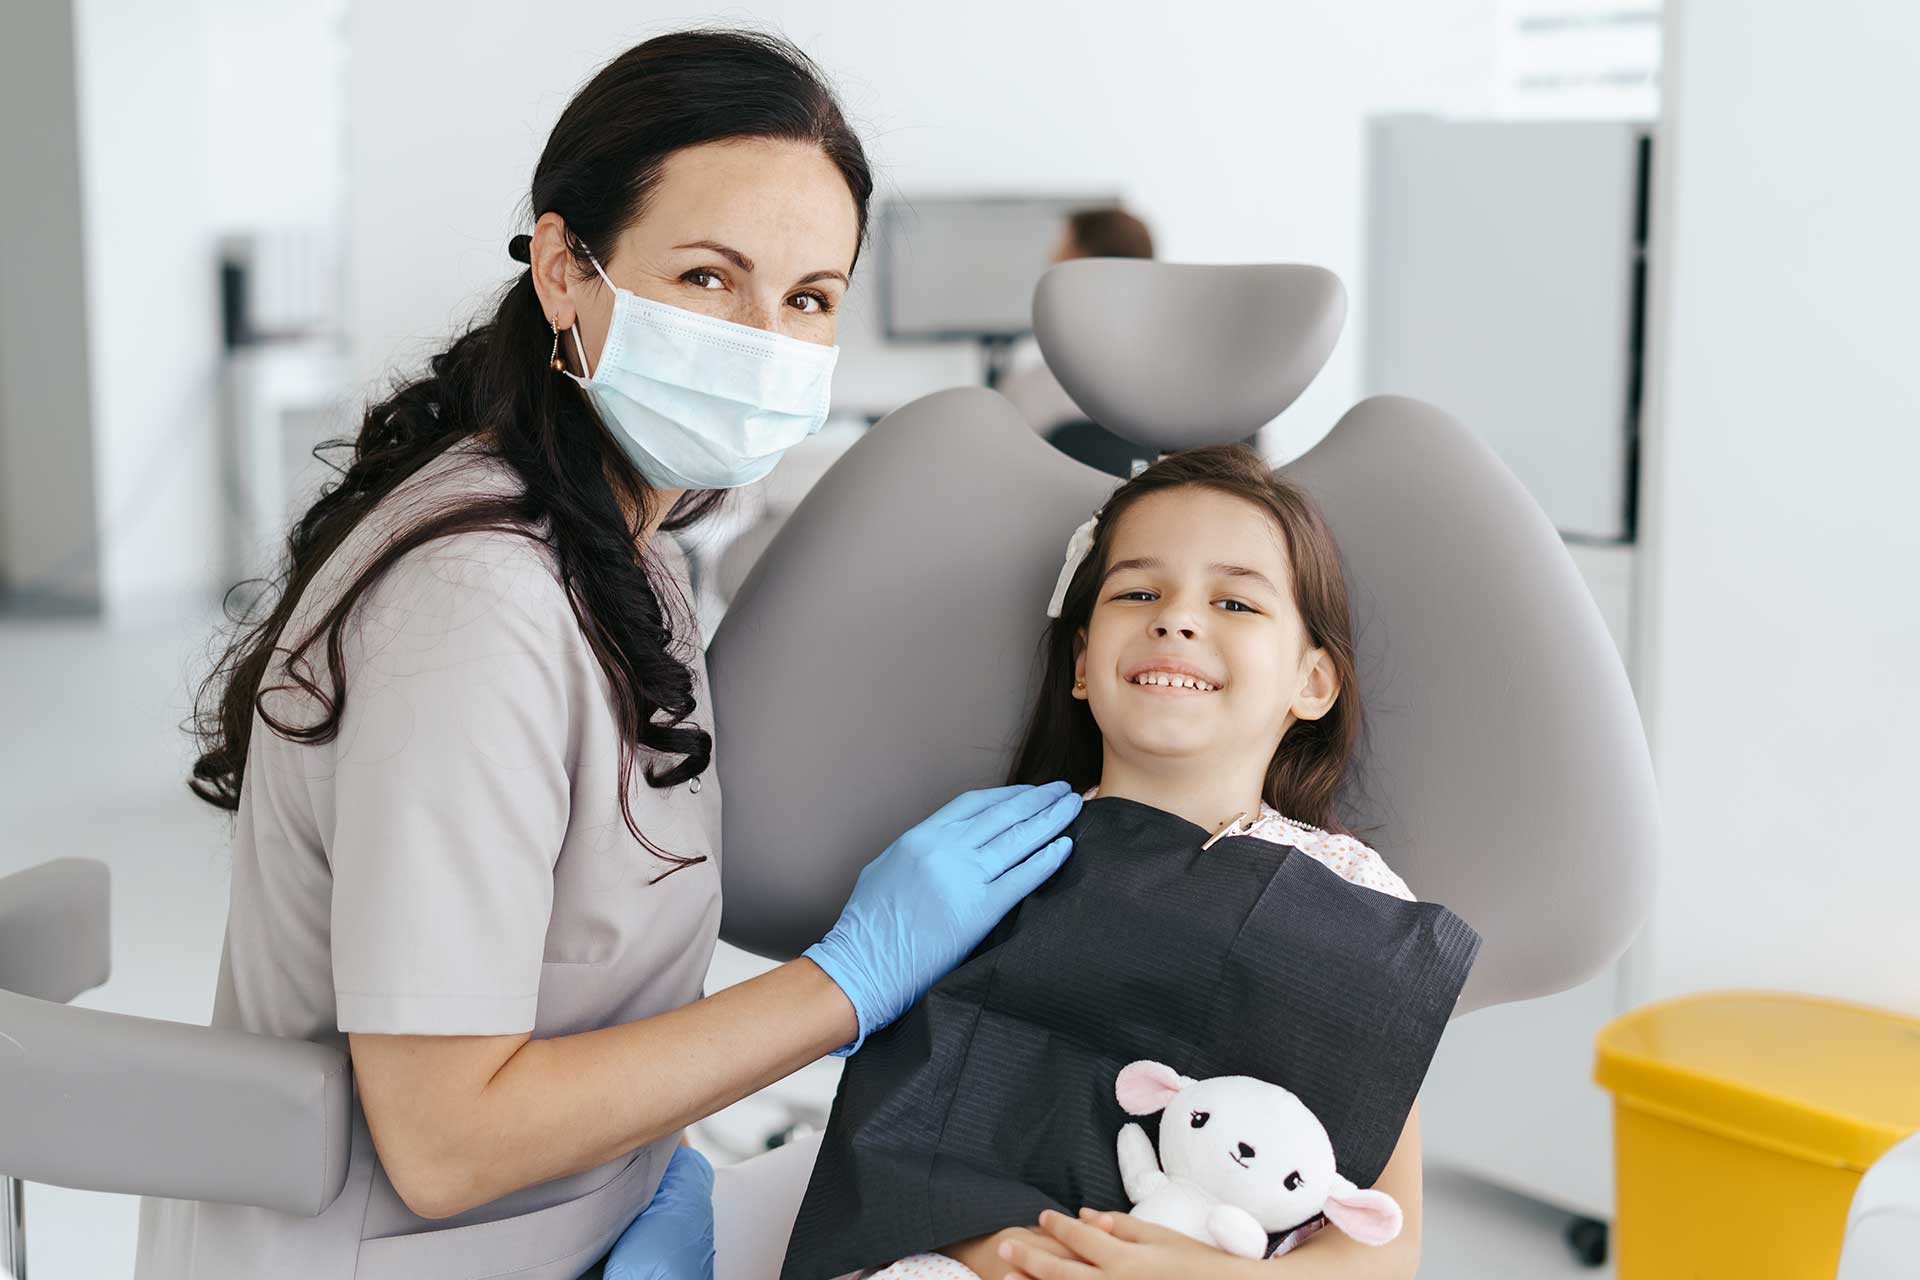 A Parent's Guide to Overcoming Children's Fear of the Dentist